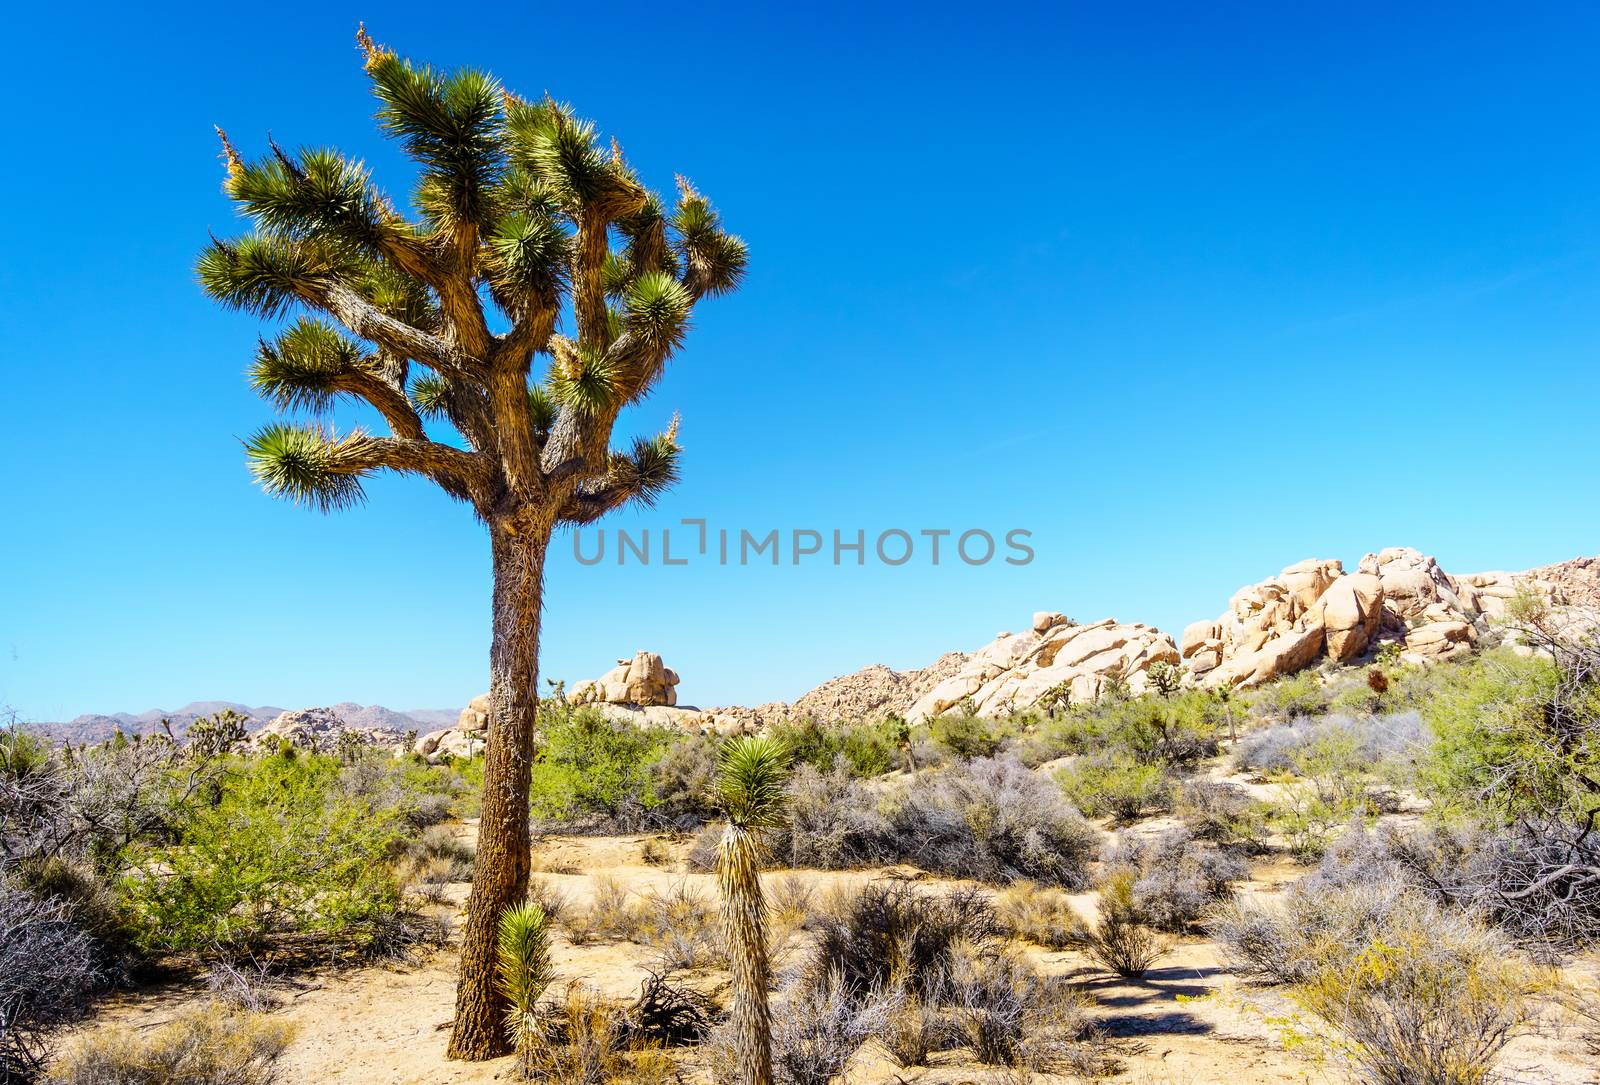 Large spiky joshua tree standing out in a desert landscape. Blue sky in background. No clouds